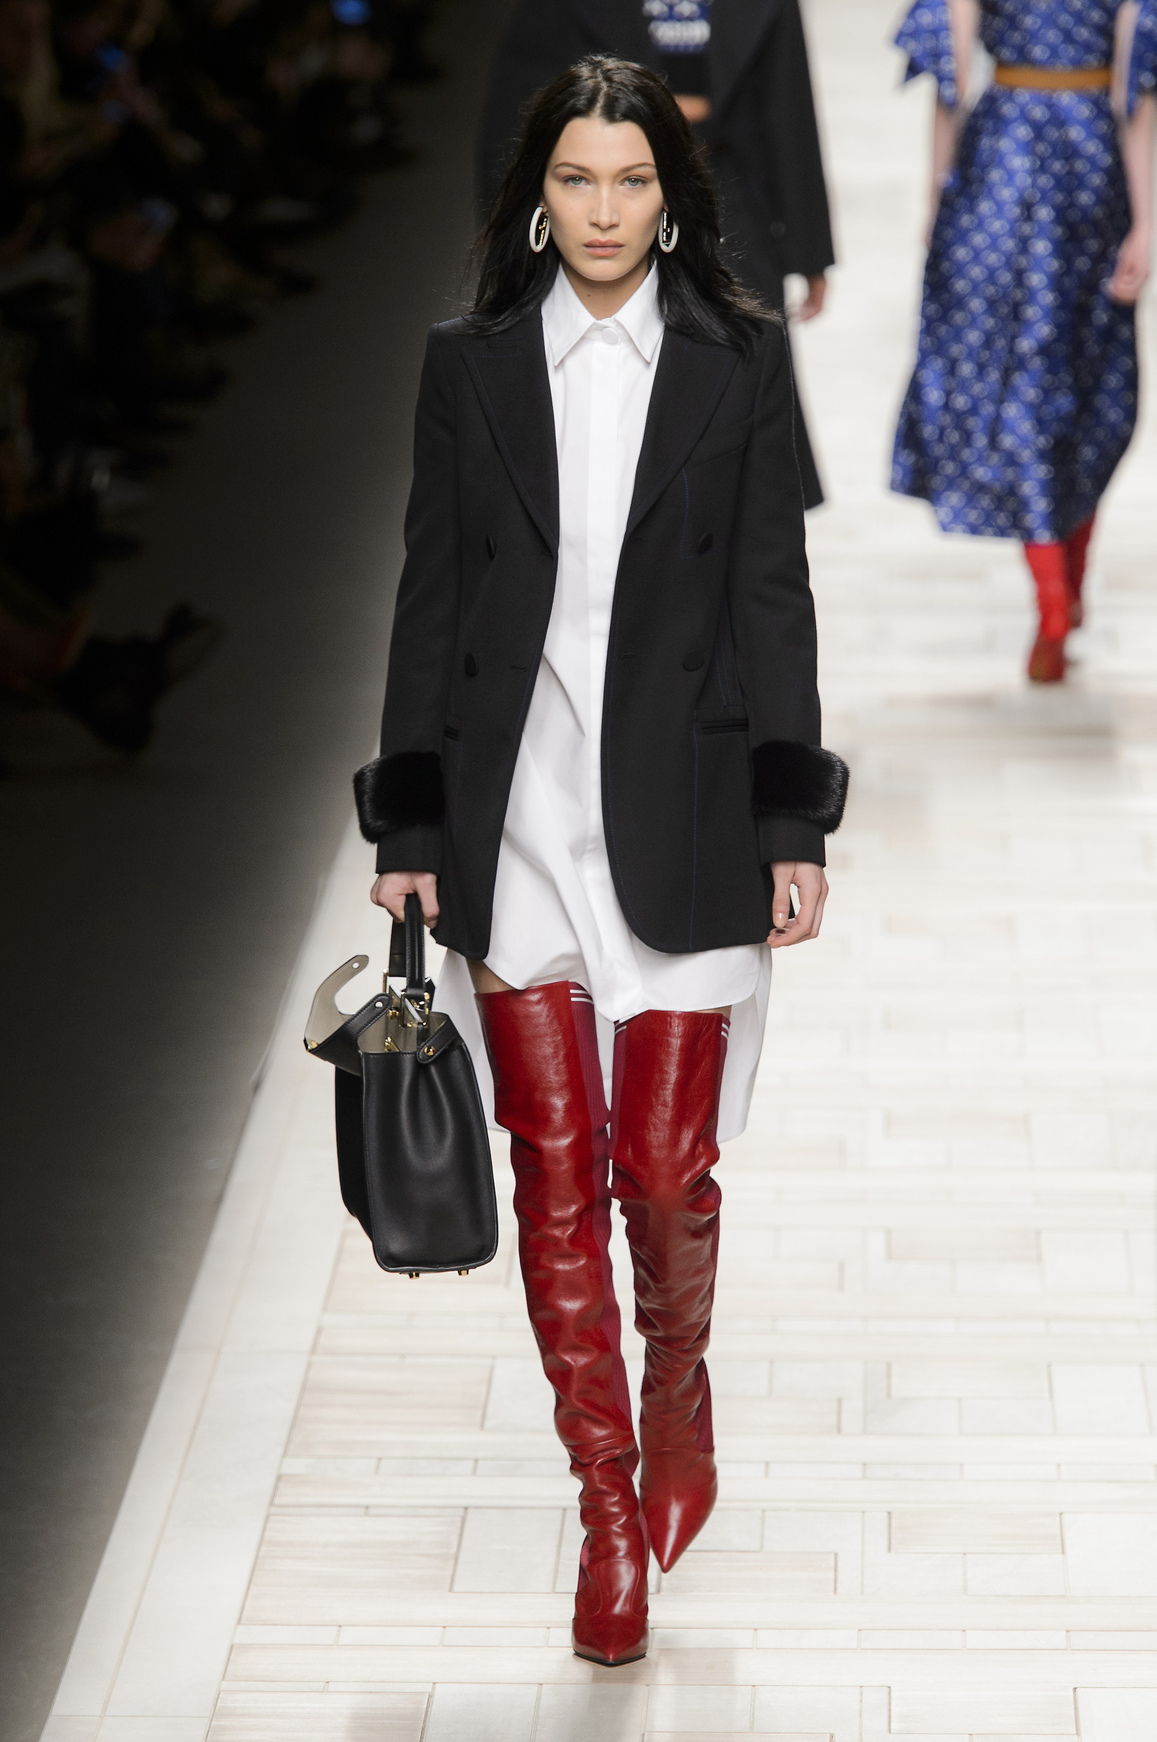 fendi red over the knee boots